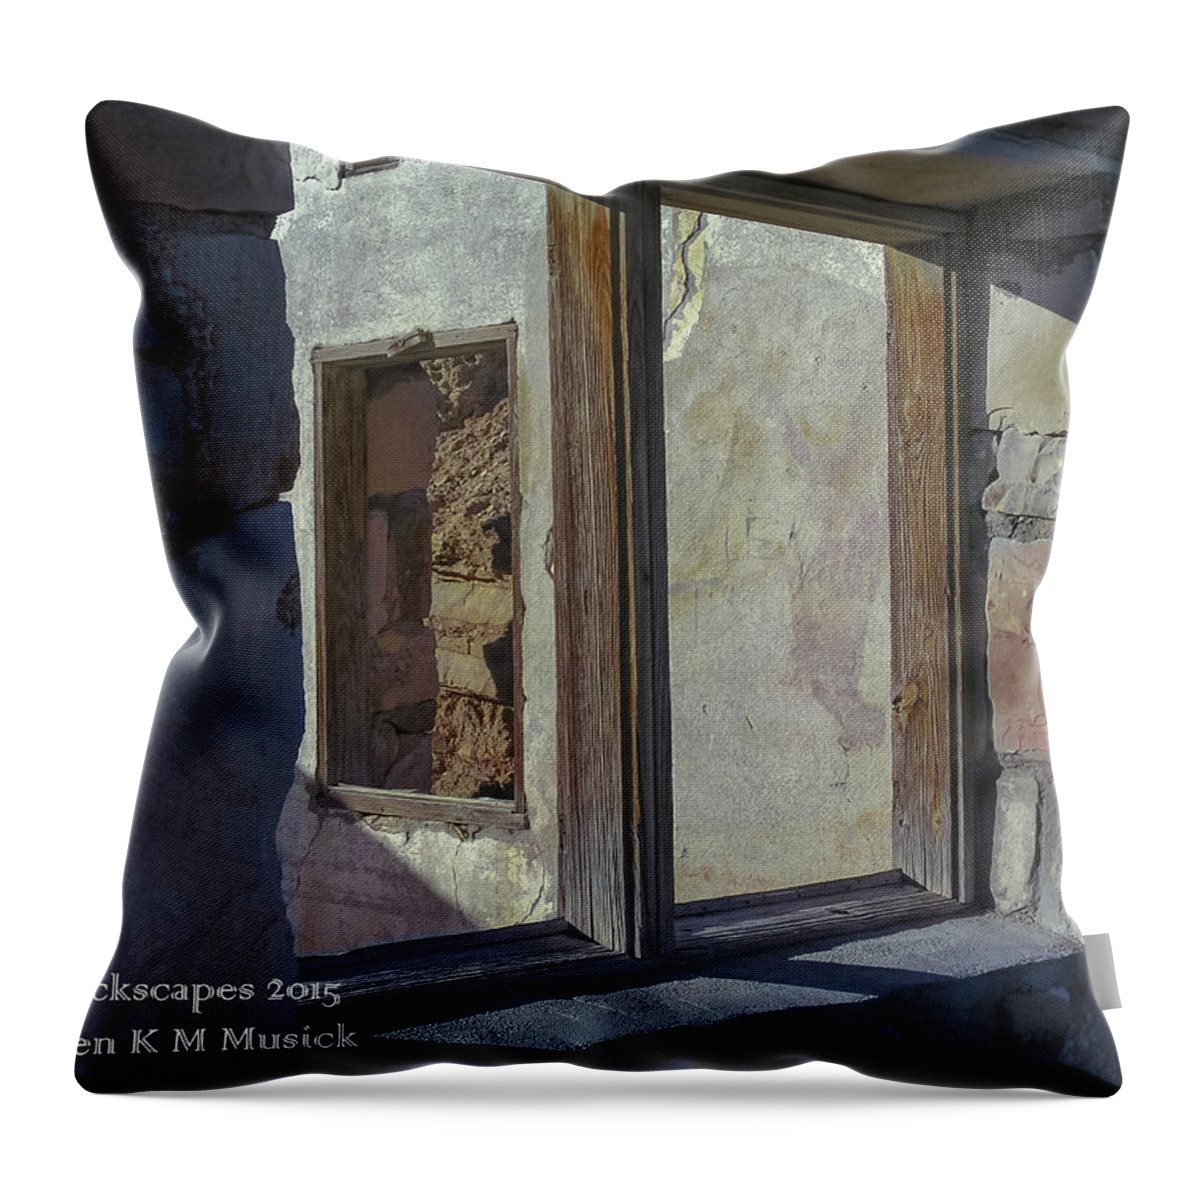 This Room With A View Looks Through Two Windows In This Old Home Built Right On The Rio Grande River In Big Bend Throw Pillow featuring the photograph Double Take by Karen Musick